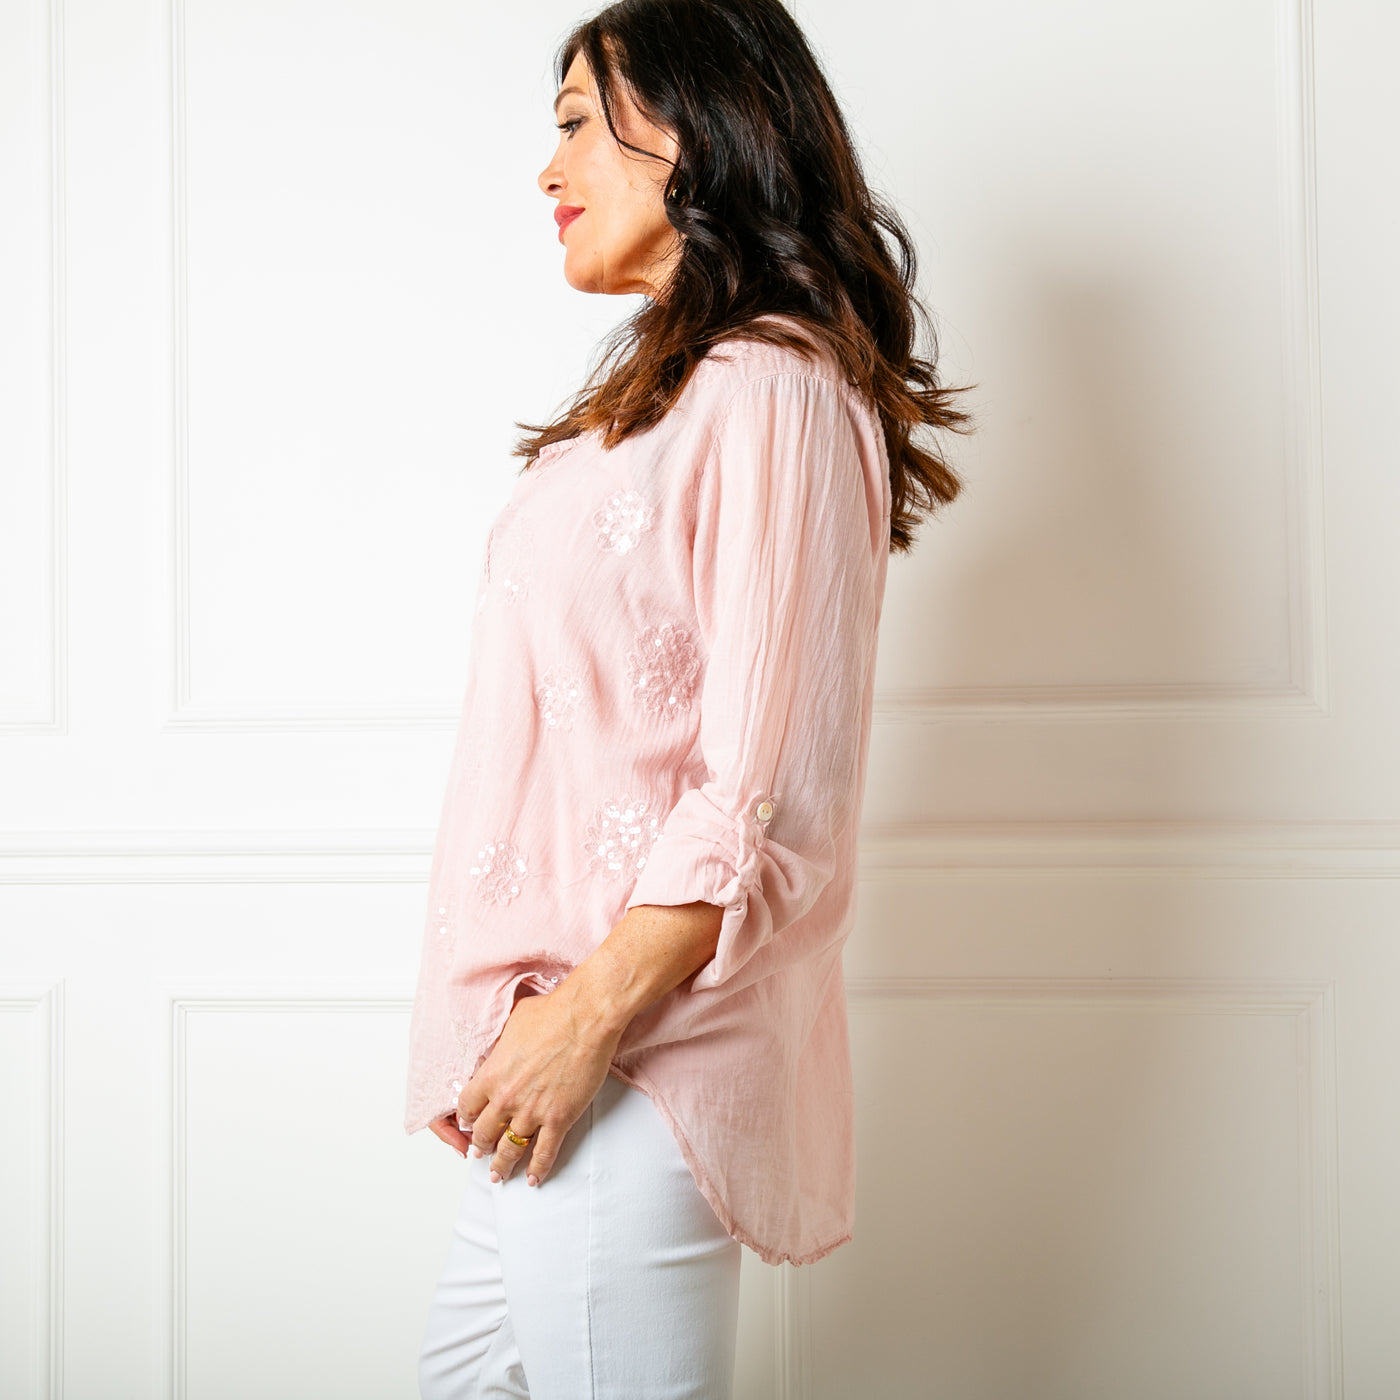 The dusky pink Sheer Sequin Blouse featuring beautiful floral sparkly sequin detailing across the front of the body